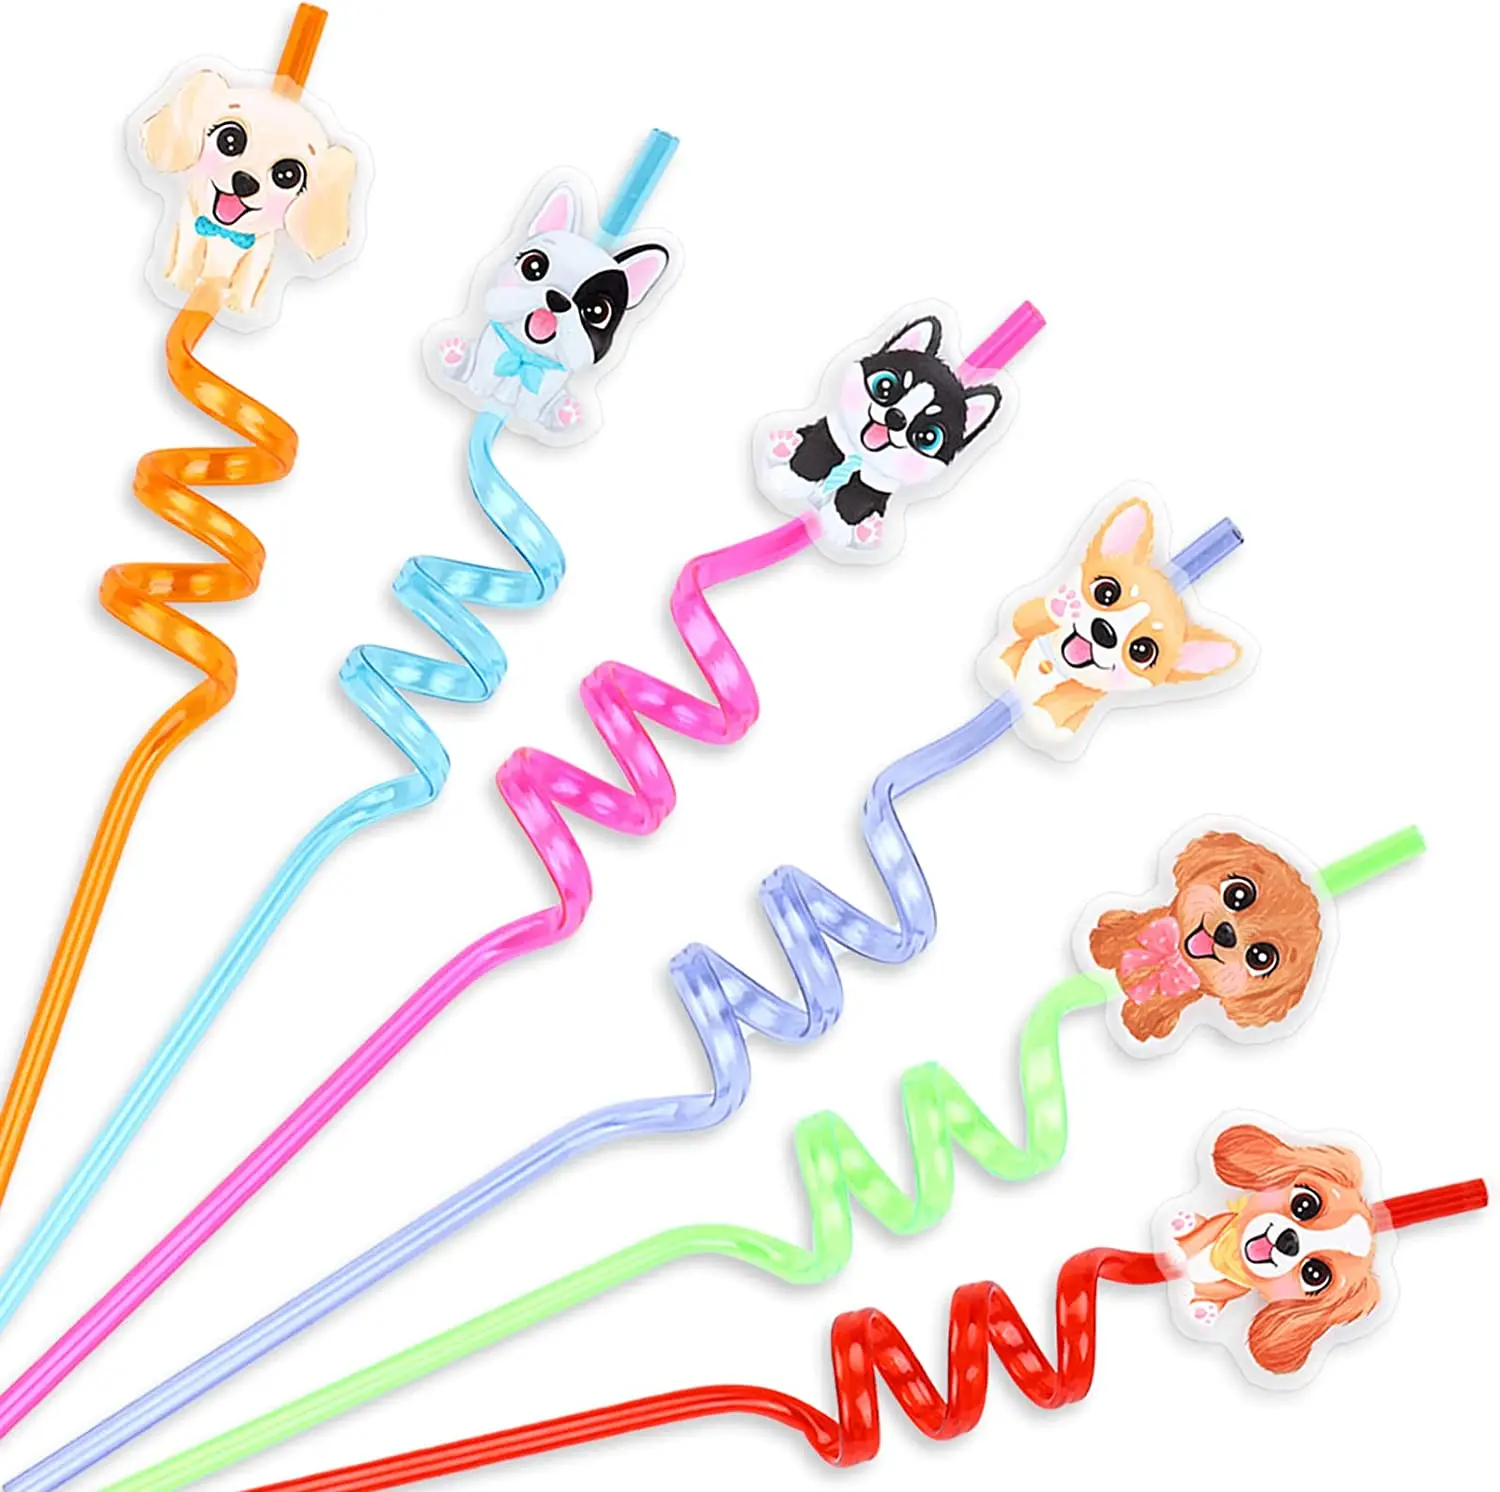 

18 Pack Puppy Dog Party Favors Reusable Drinking Straws for Dog Paw Pets Animal Theme Kids Birthday Party Supplies Decorations